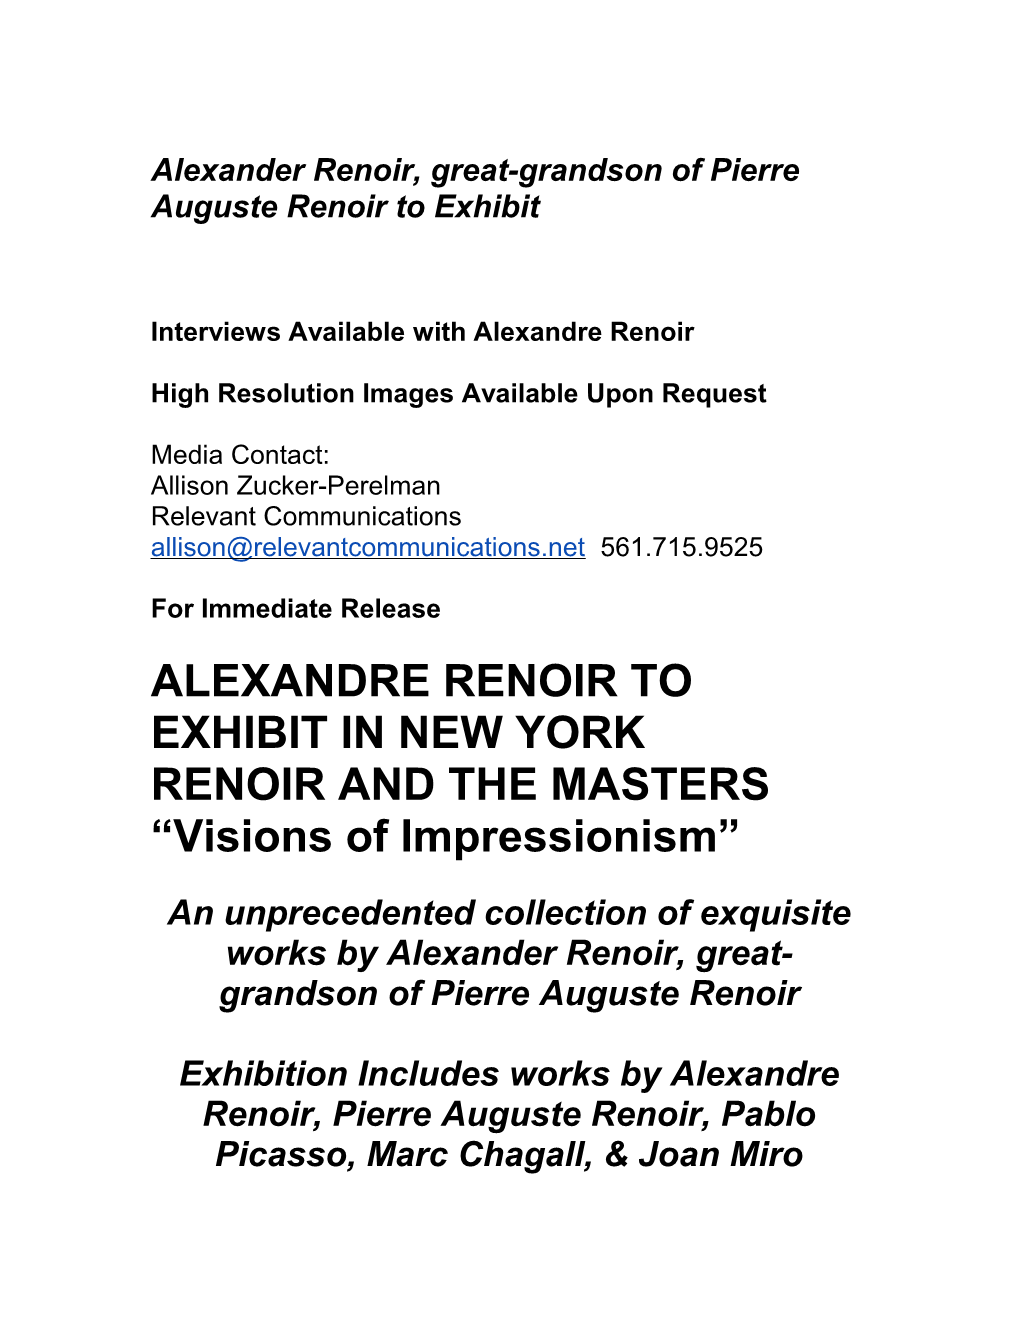 Interviews Available with Alexandre Renoir